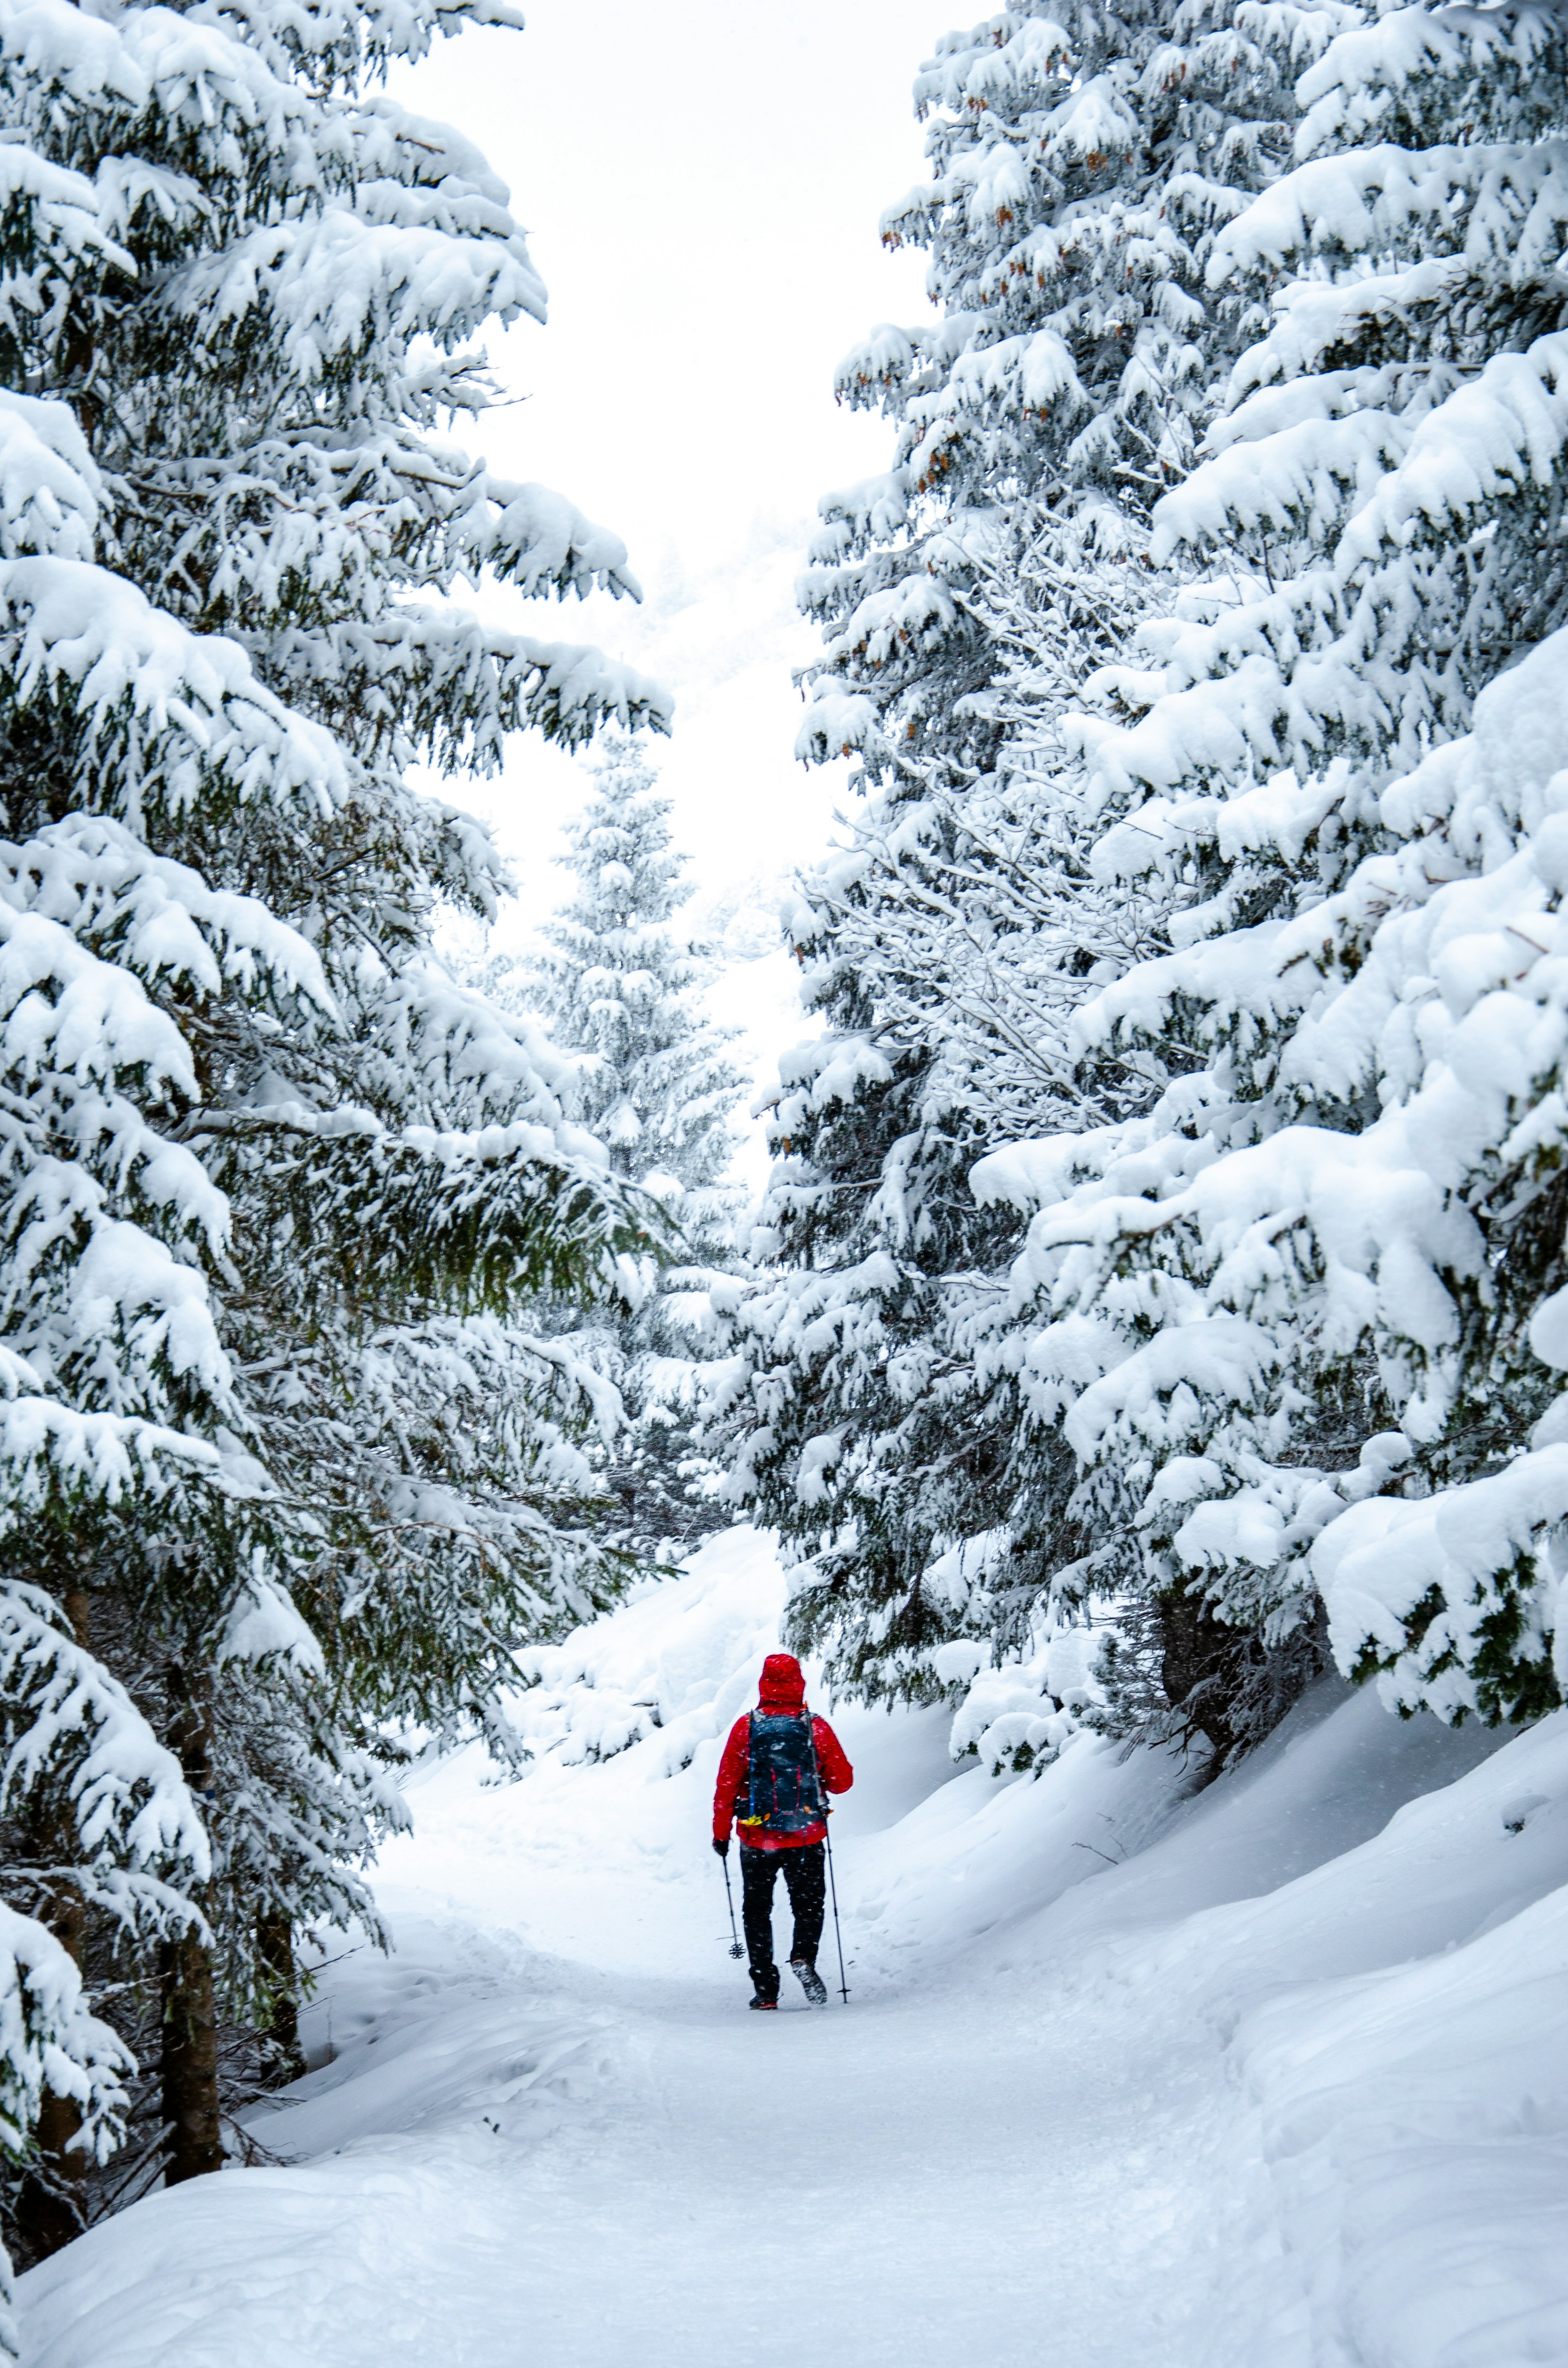 person in red jacket and black pants standing on snow covered ground near trees during daytime